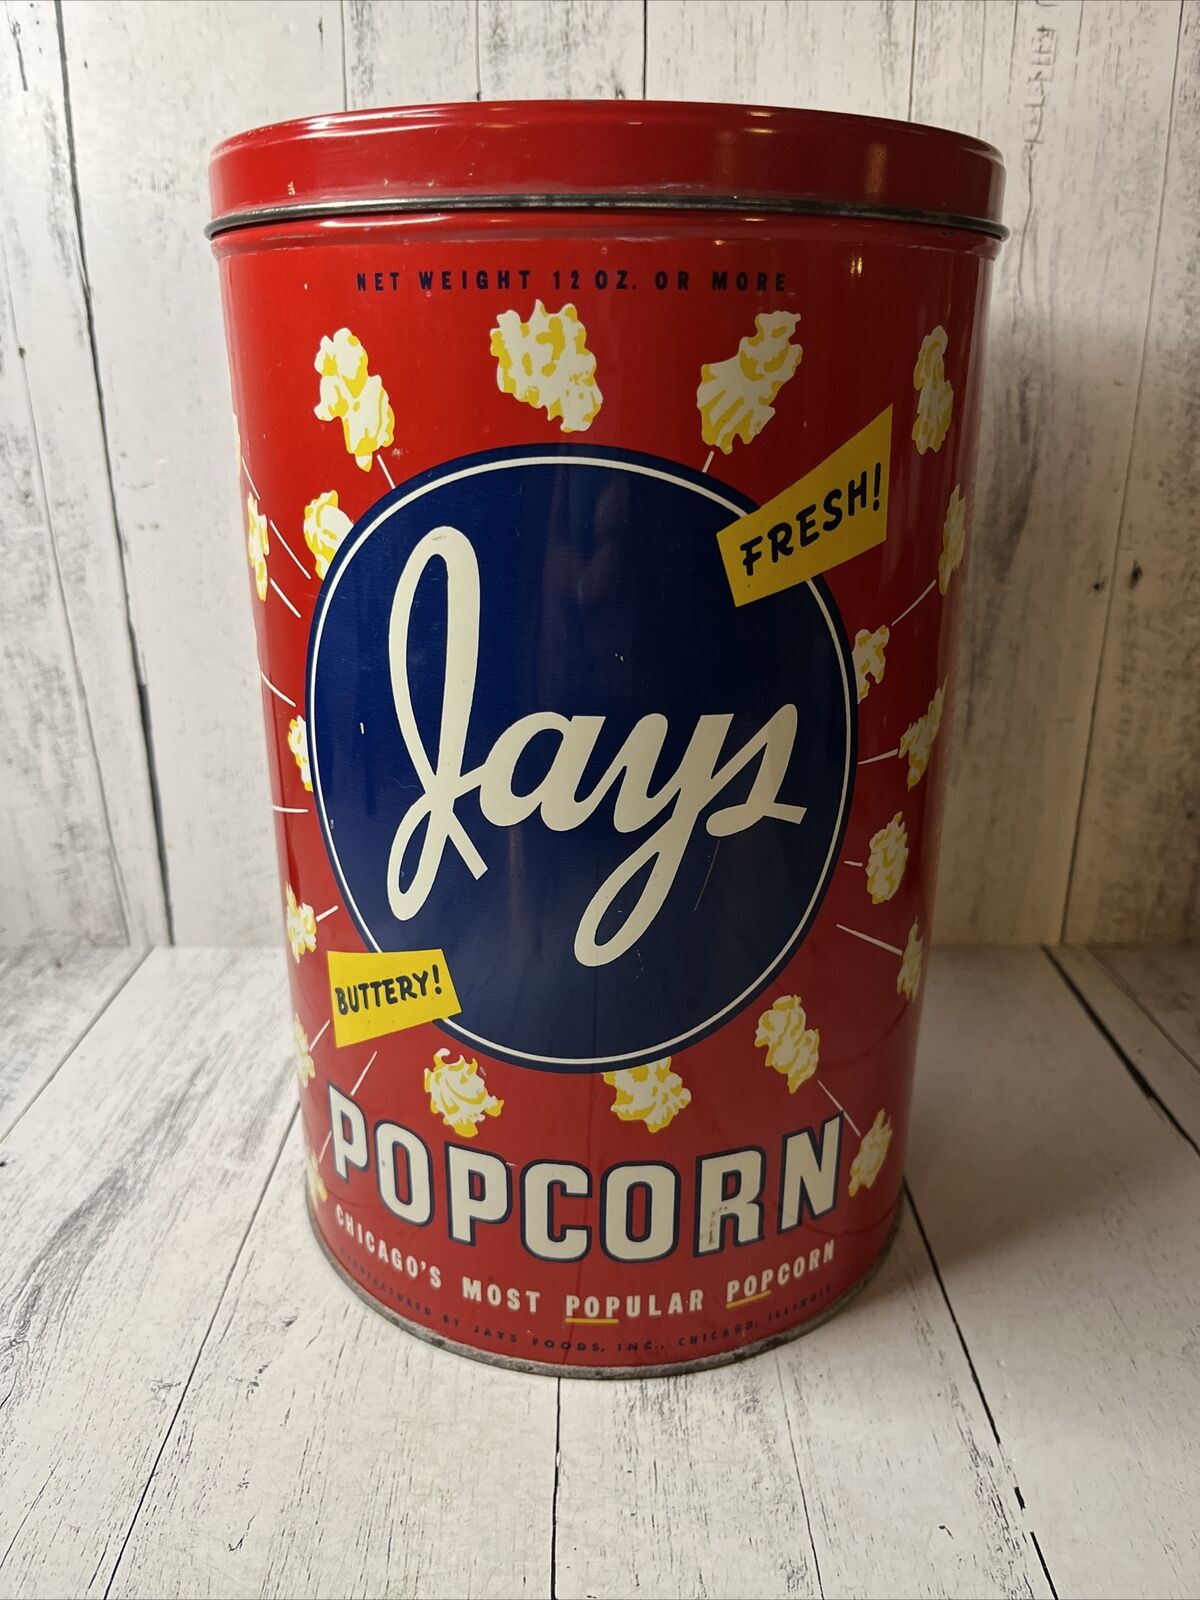 Vintage 1950s Red Jays Popcorn Tin Chicago Fresh Buttery Bright Colors